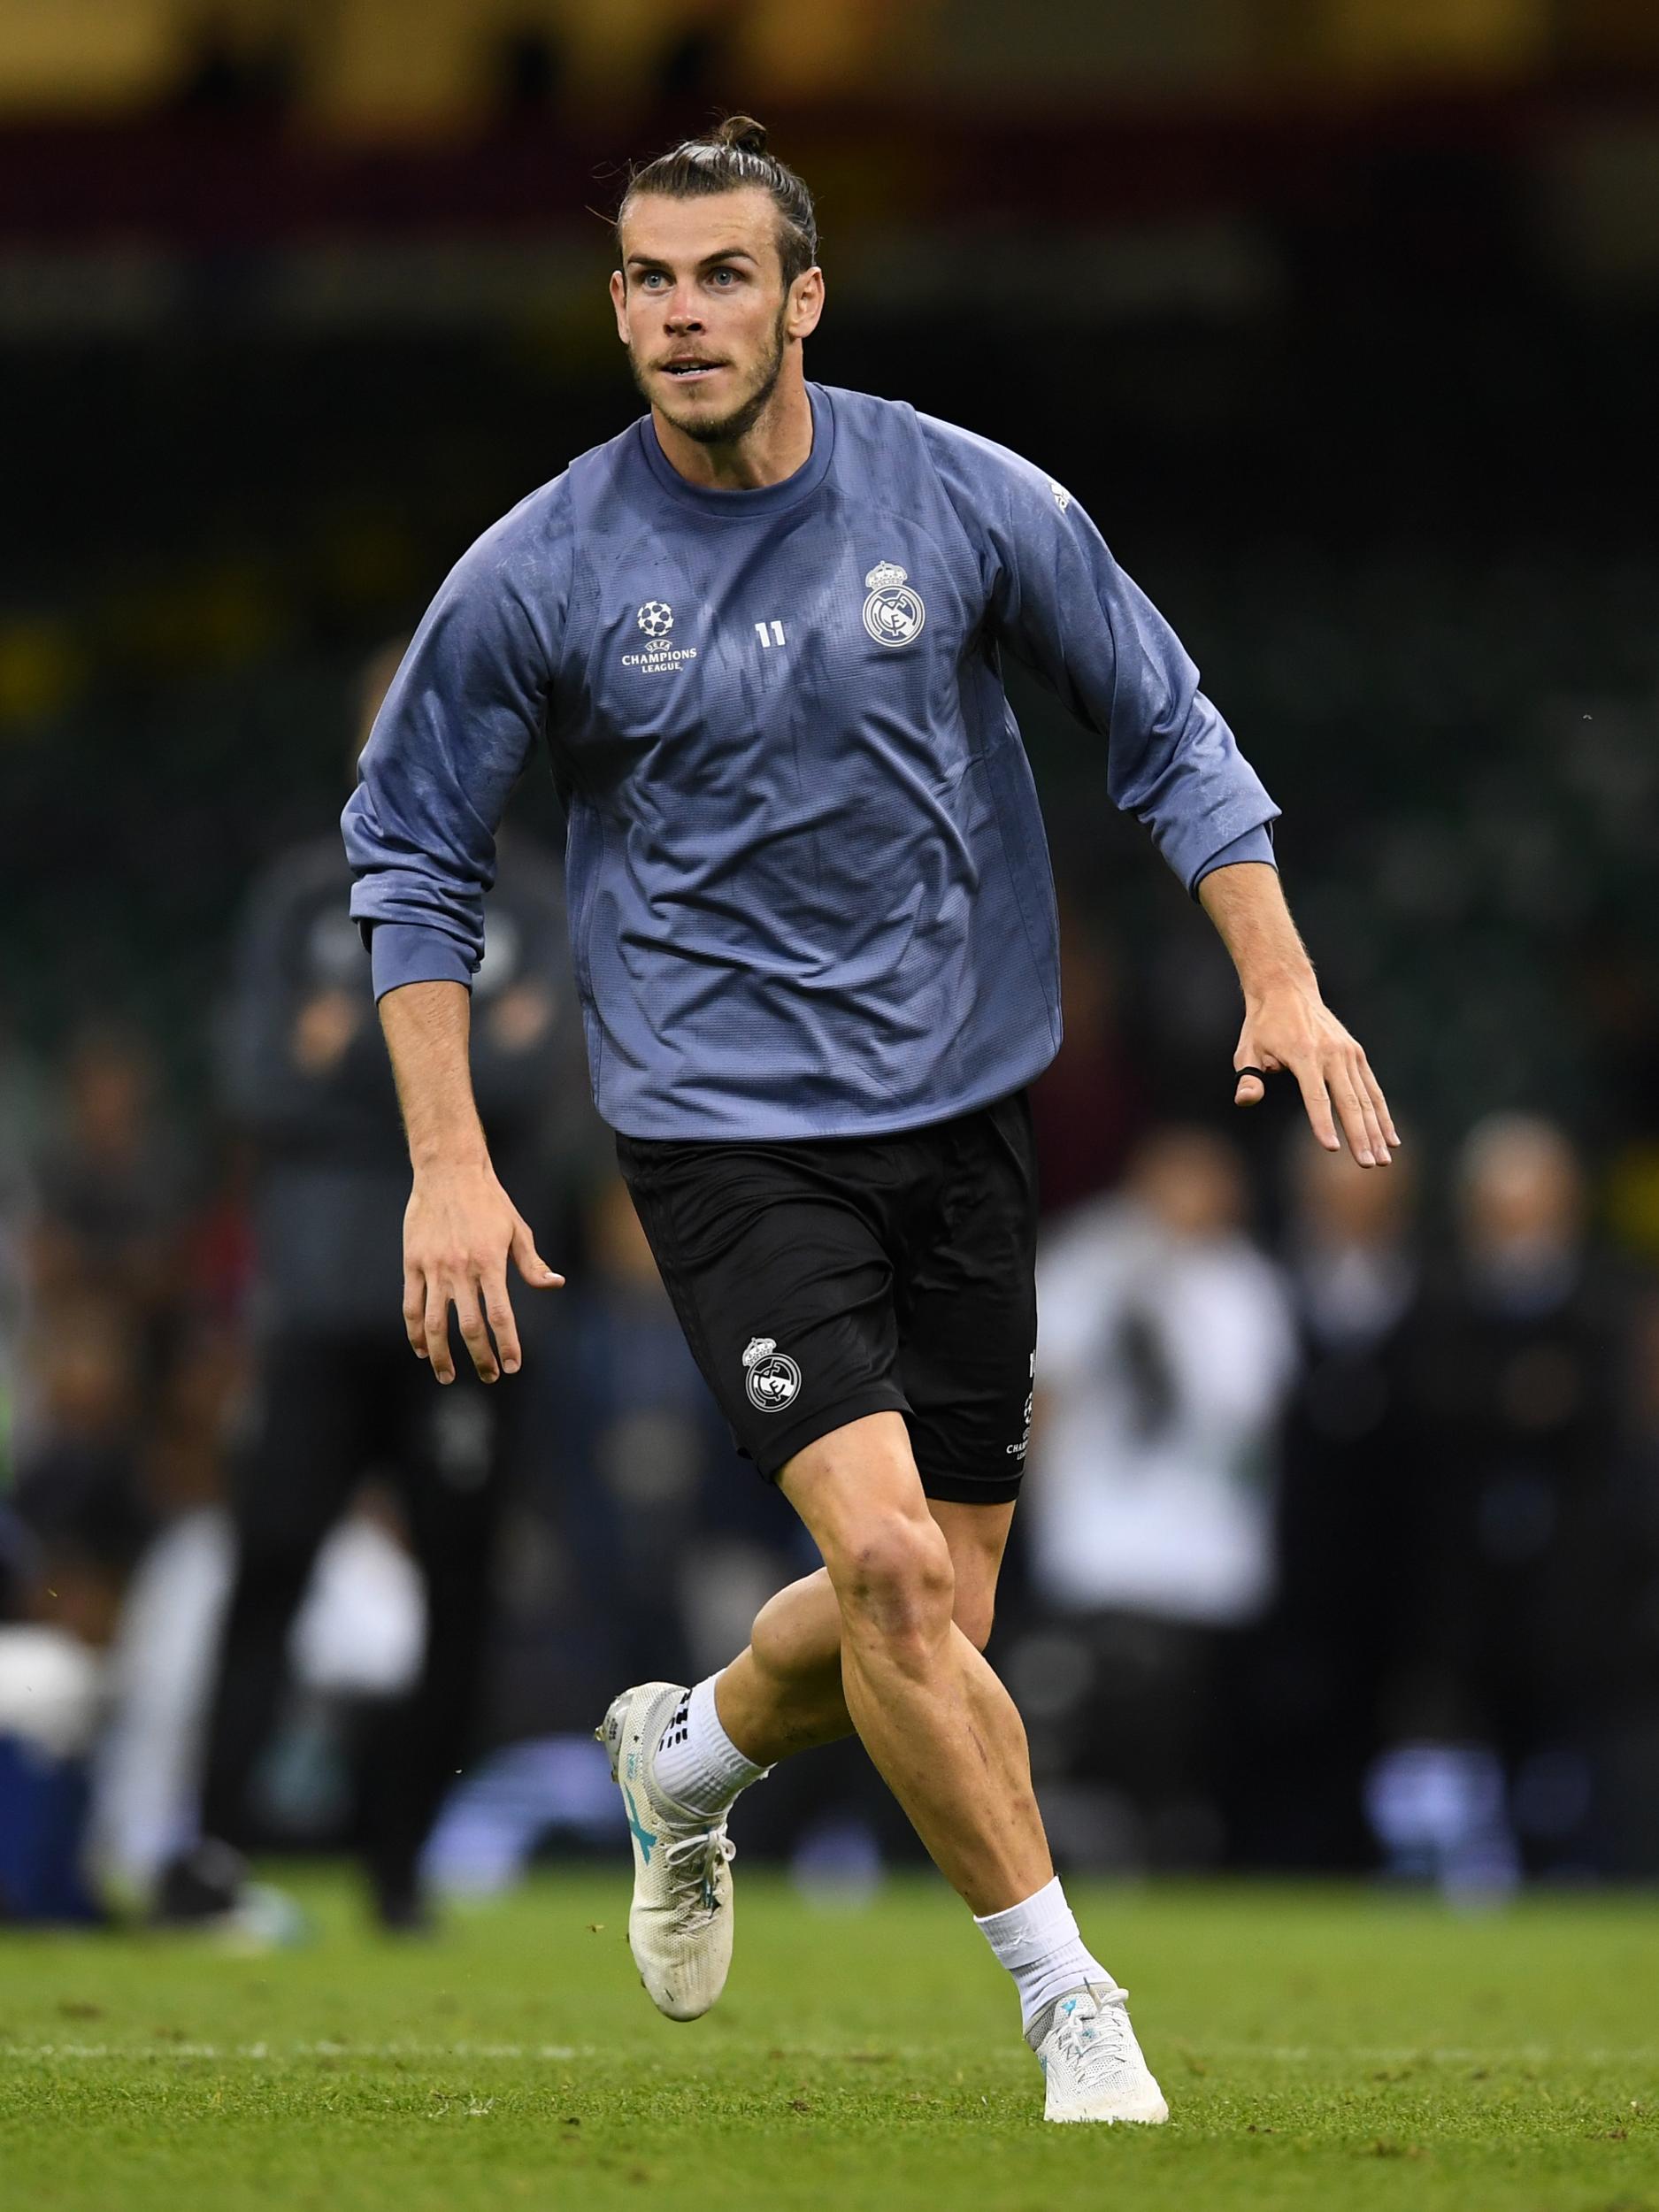 Bale has been struggling with a calf injury